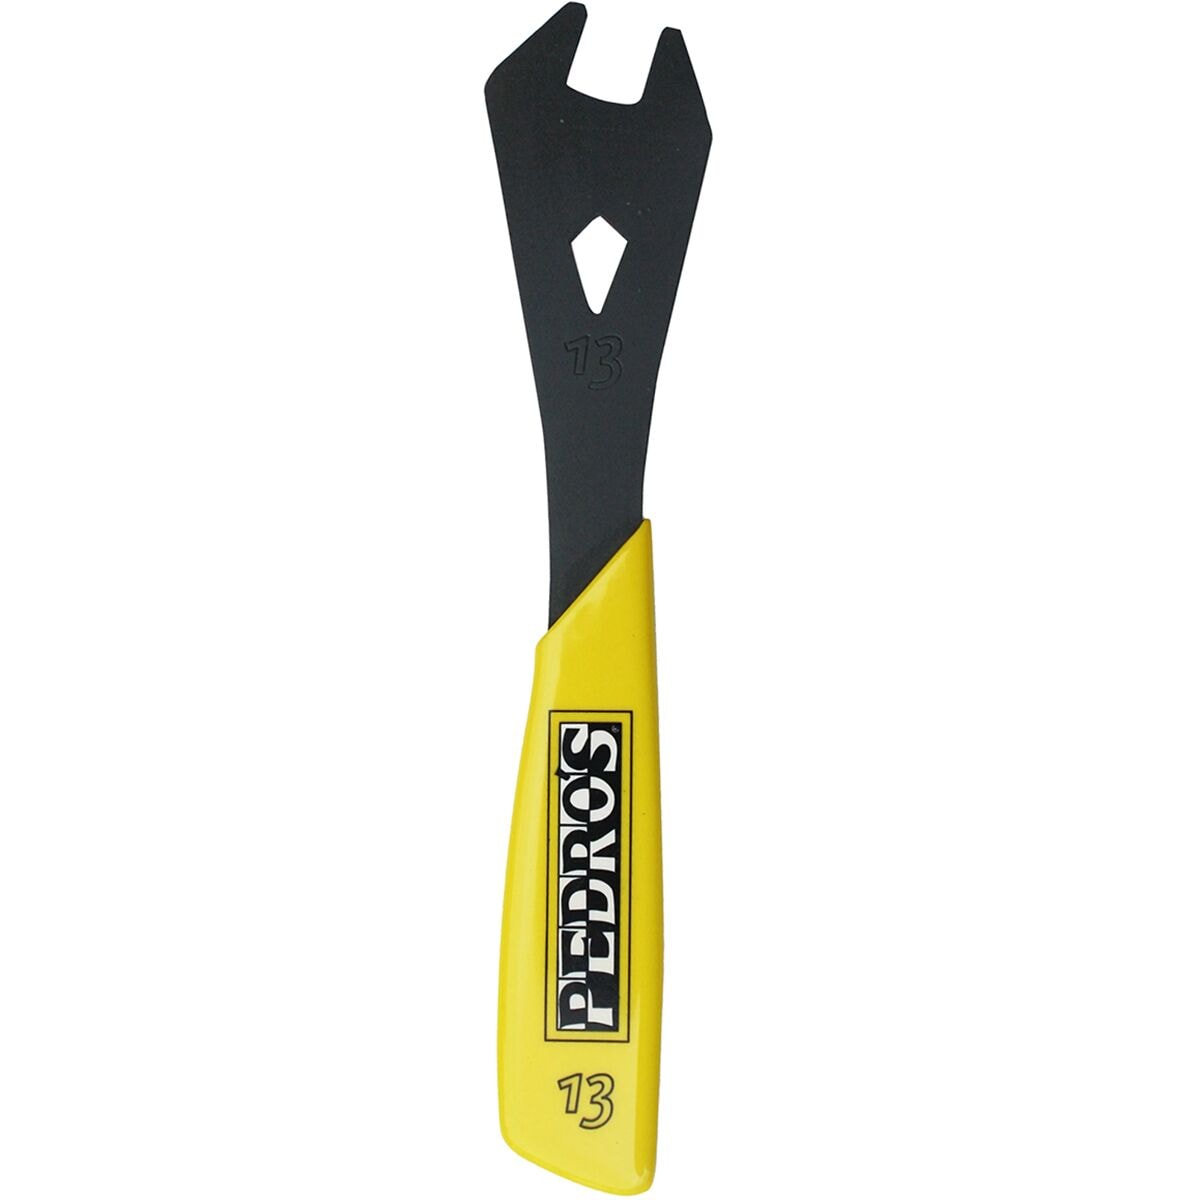 Pedro's Cone Wrench Black/Yellow, 20mm